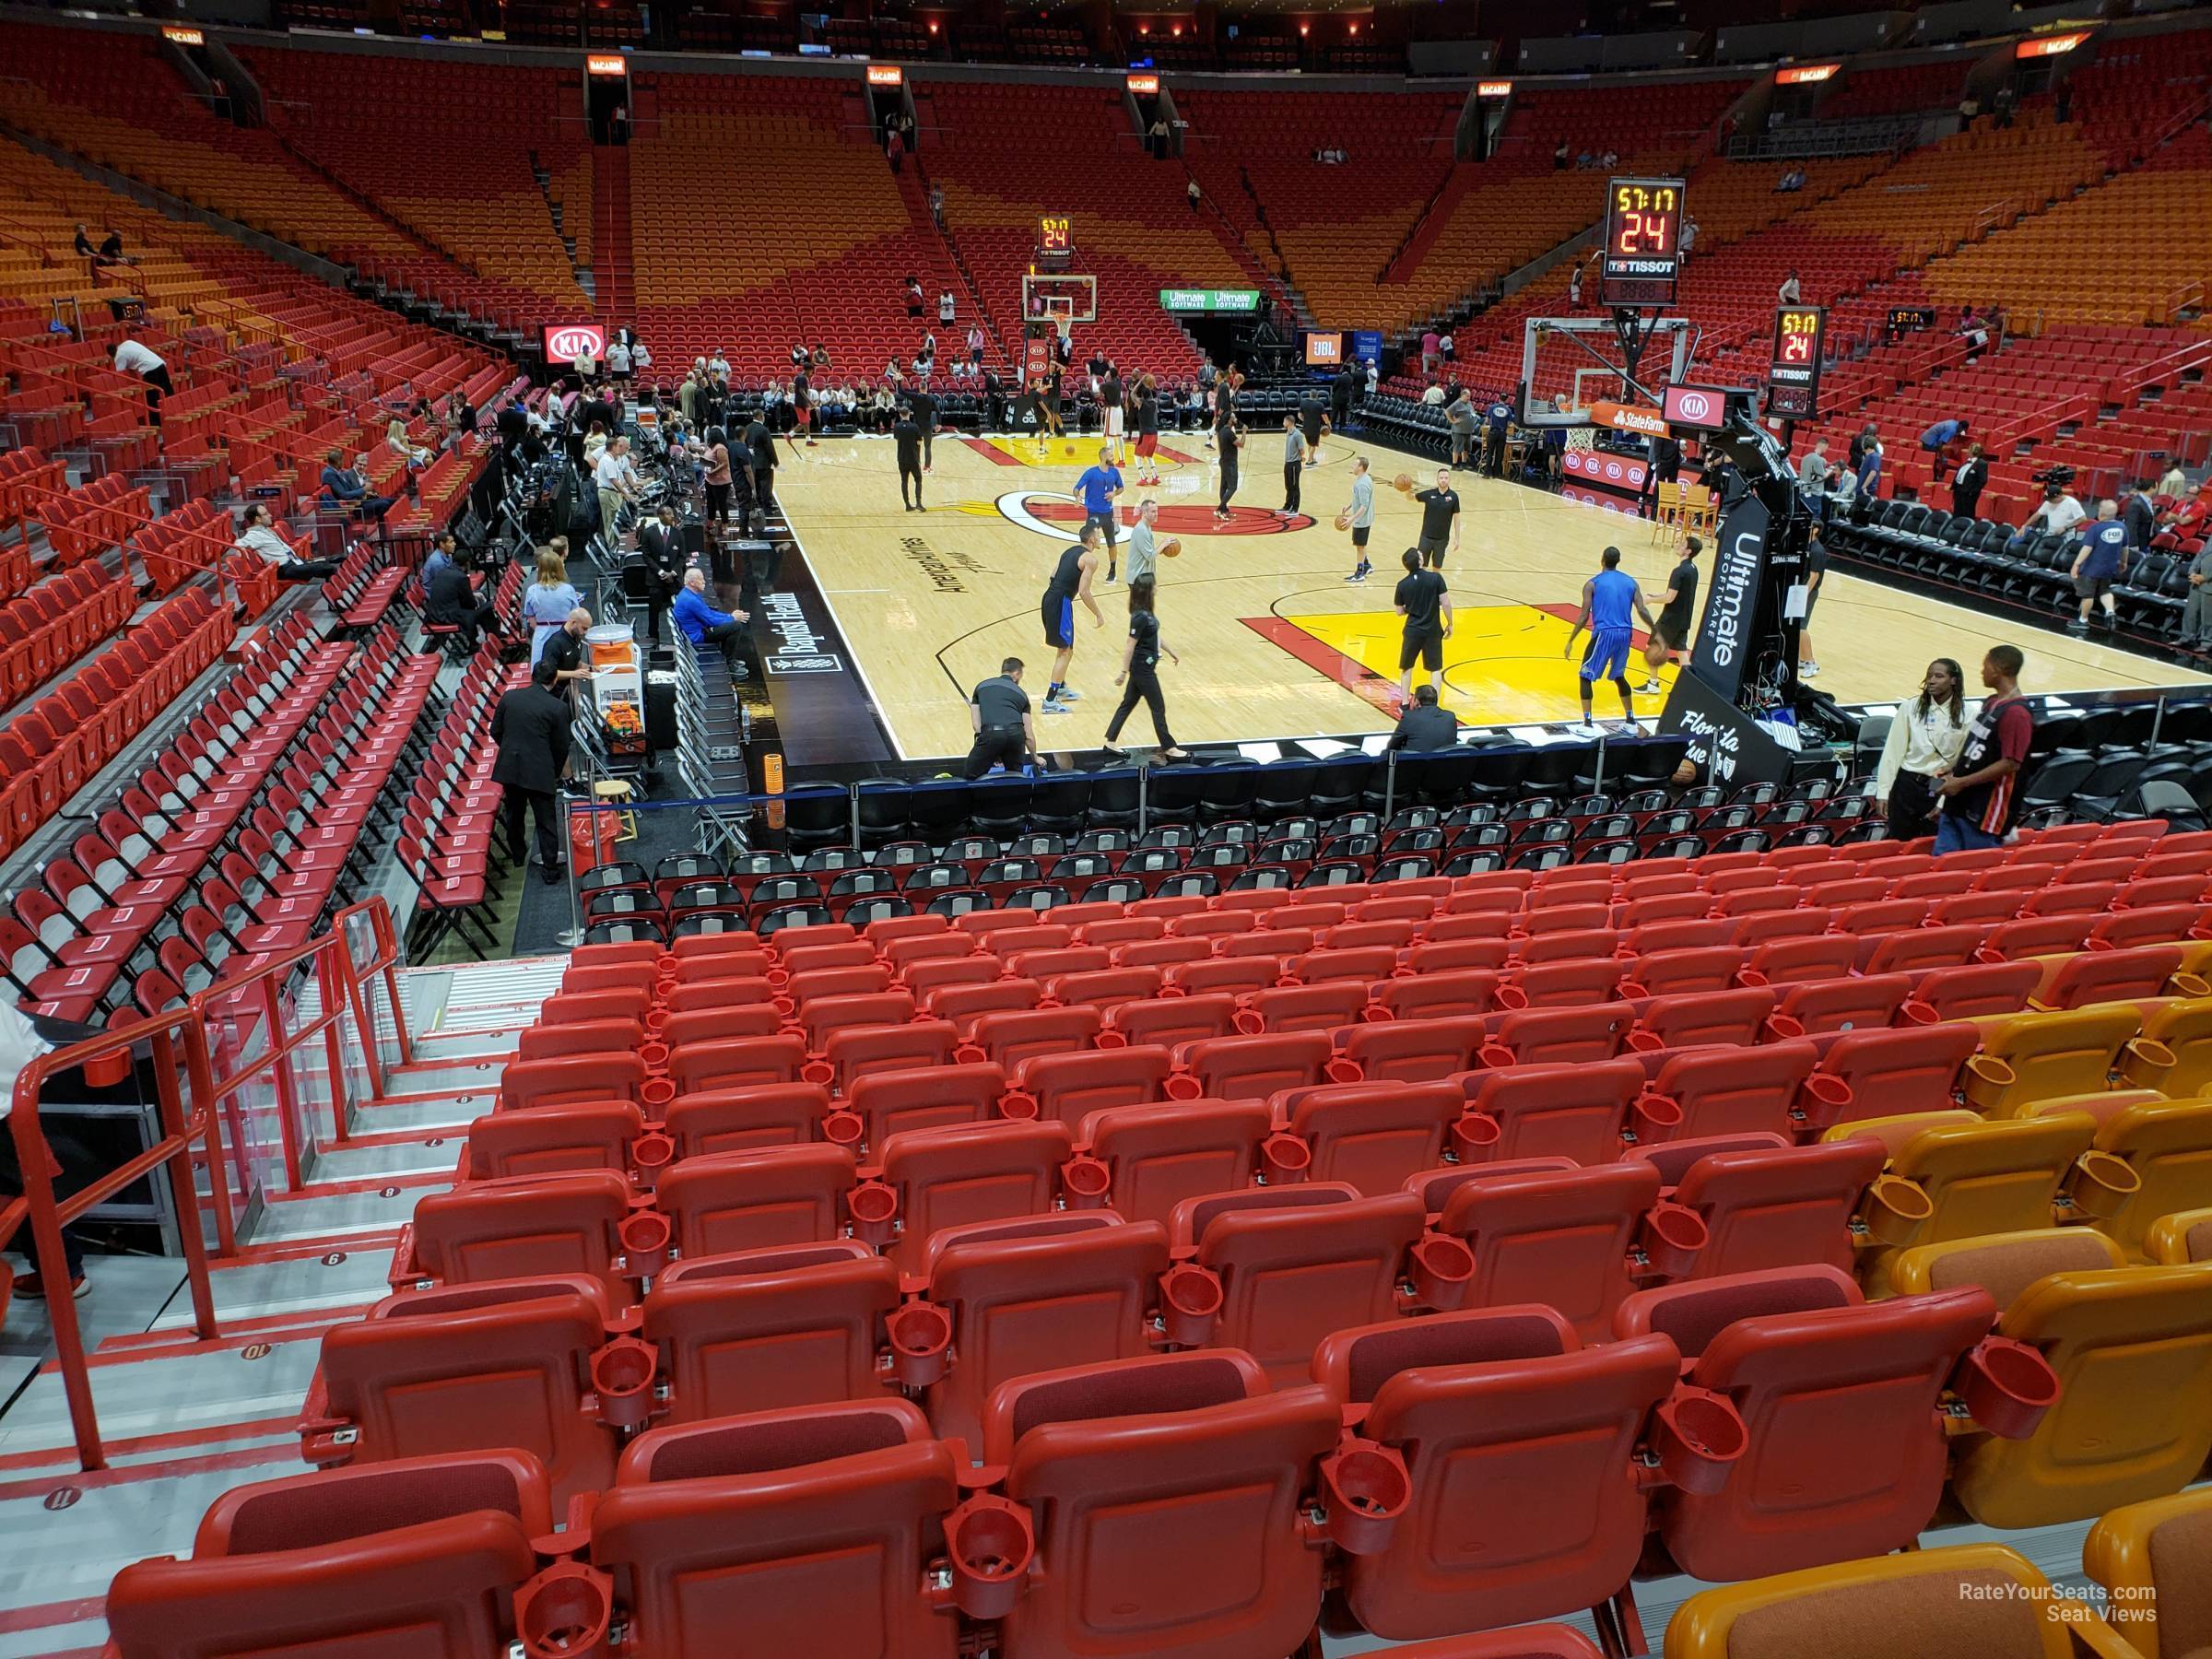 section 101, row 15 seat view  for basketball - miami-dade arena